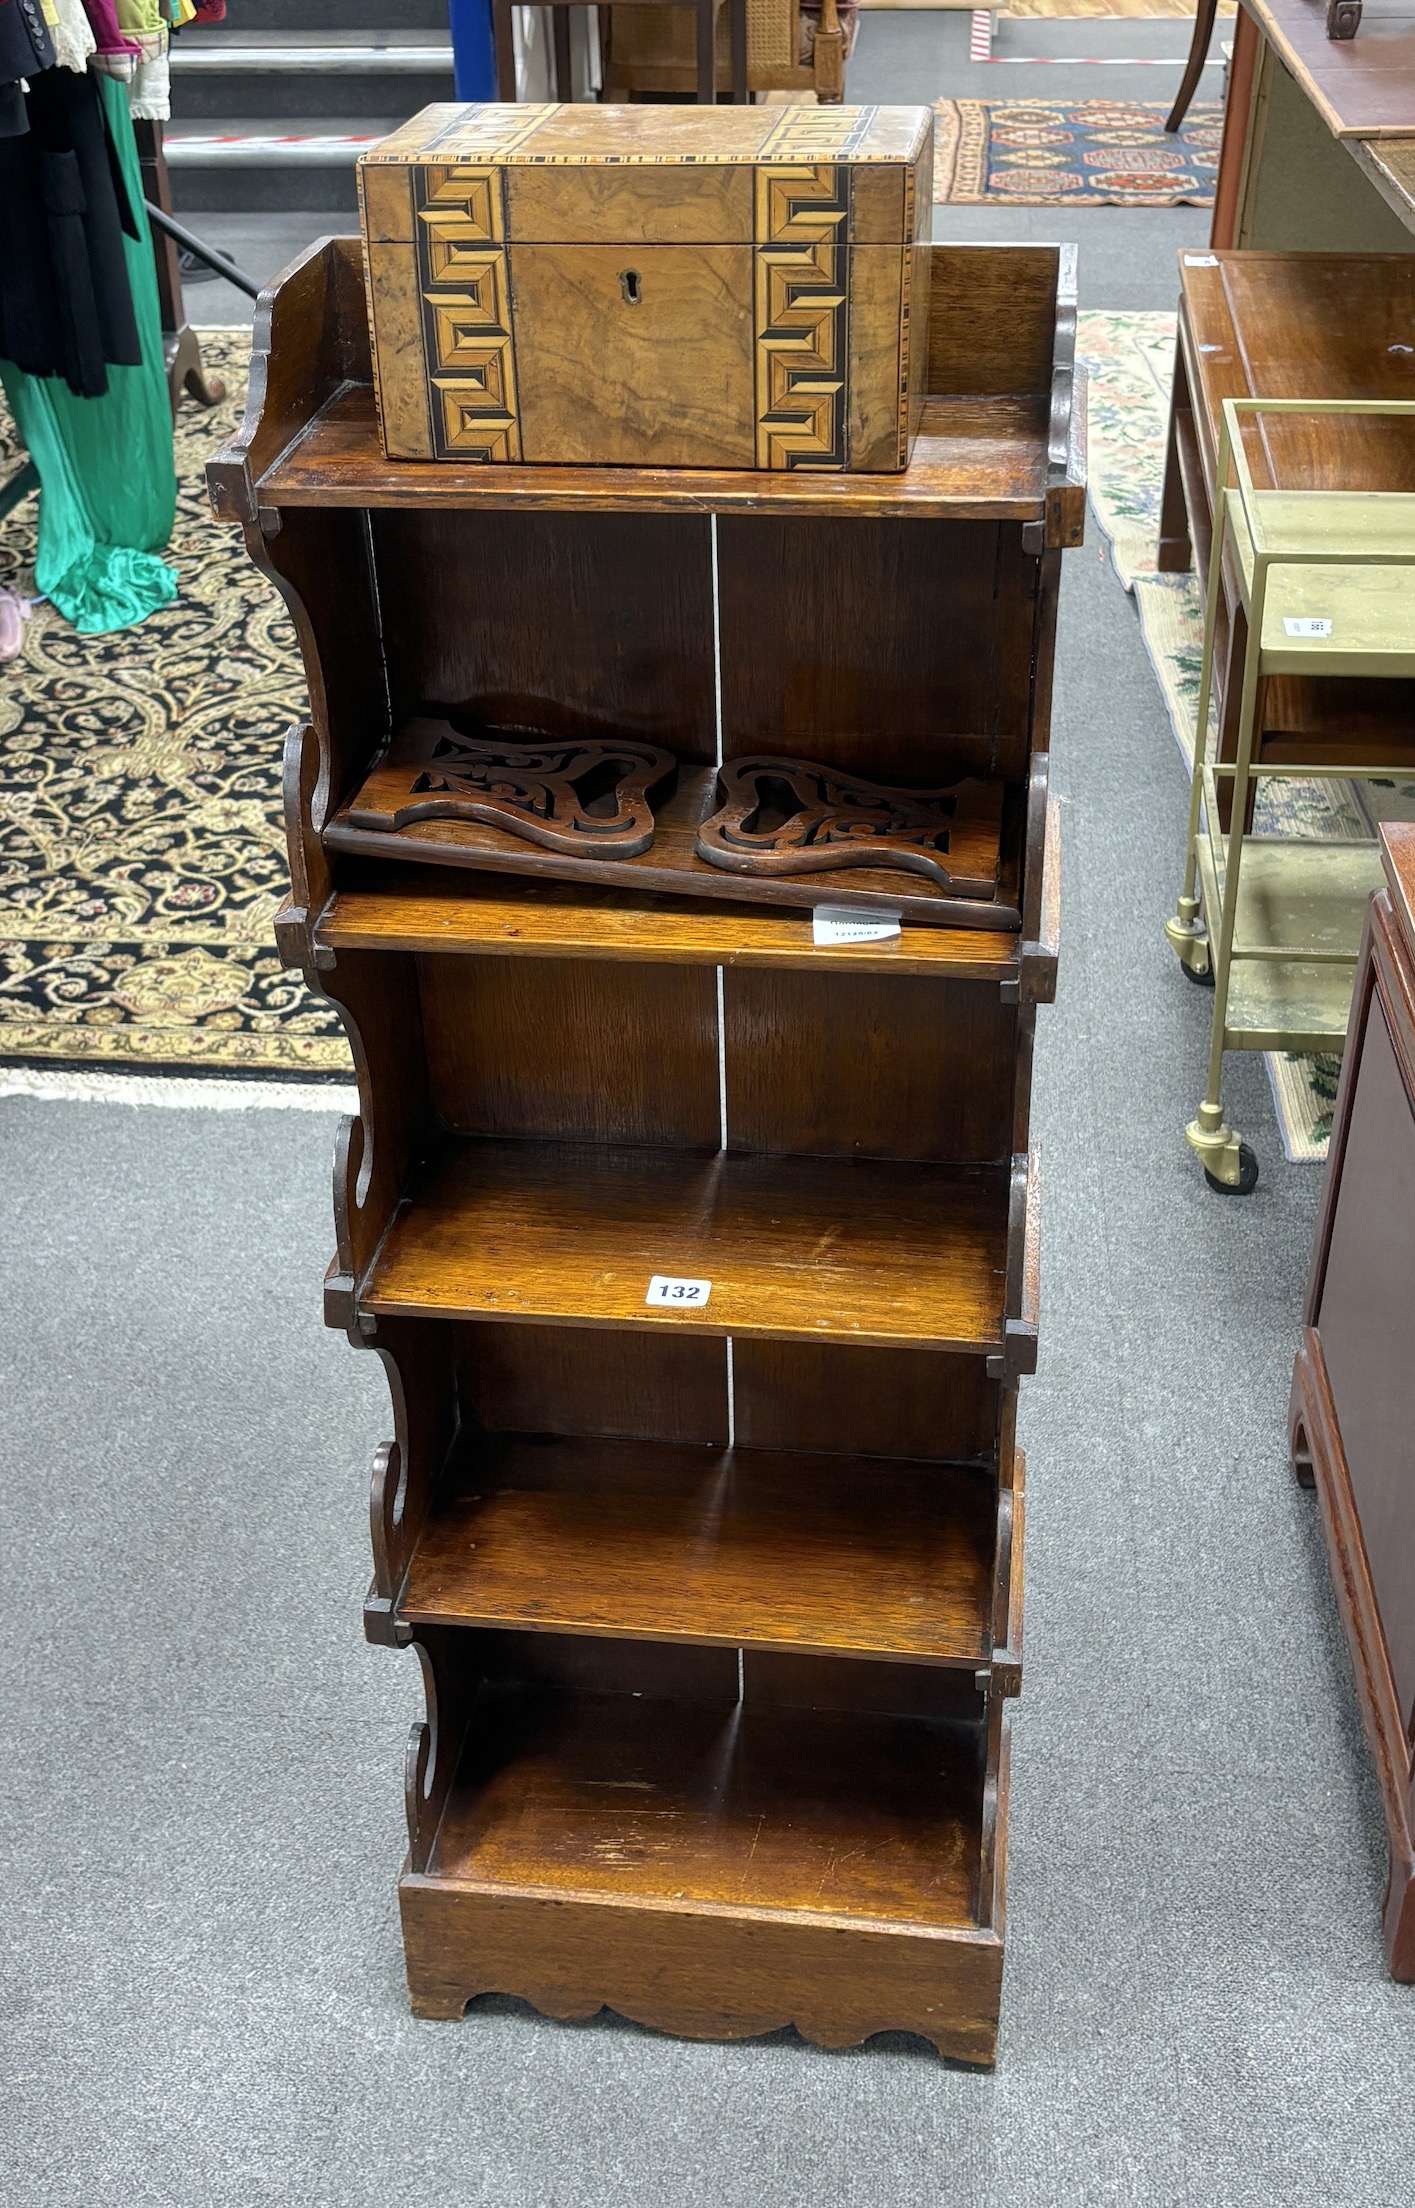 A Victorian style mahogany five tier narrow bookcase, width 36cm, depth 17cm, height 104cm, Victorian parquetry inlaid tea caddy and a Victorian bookslide